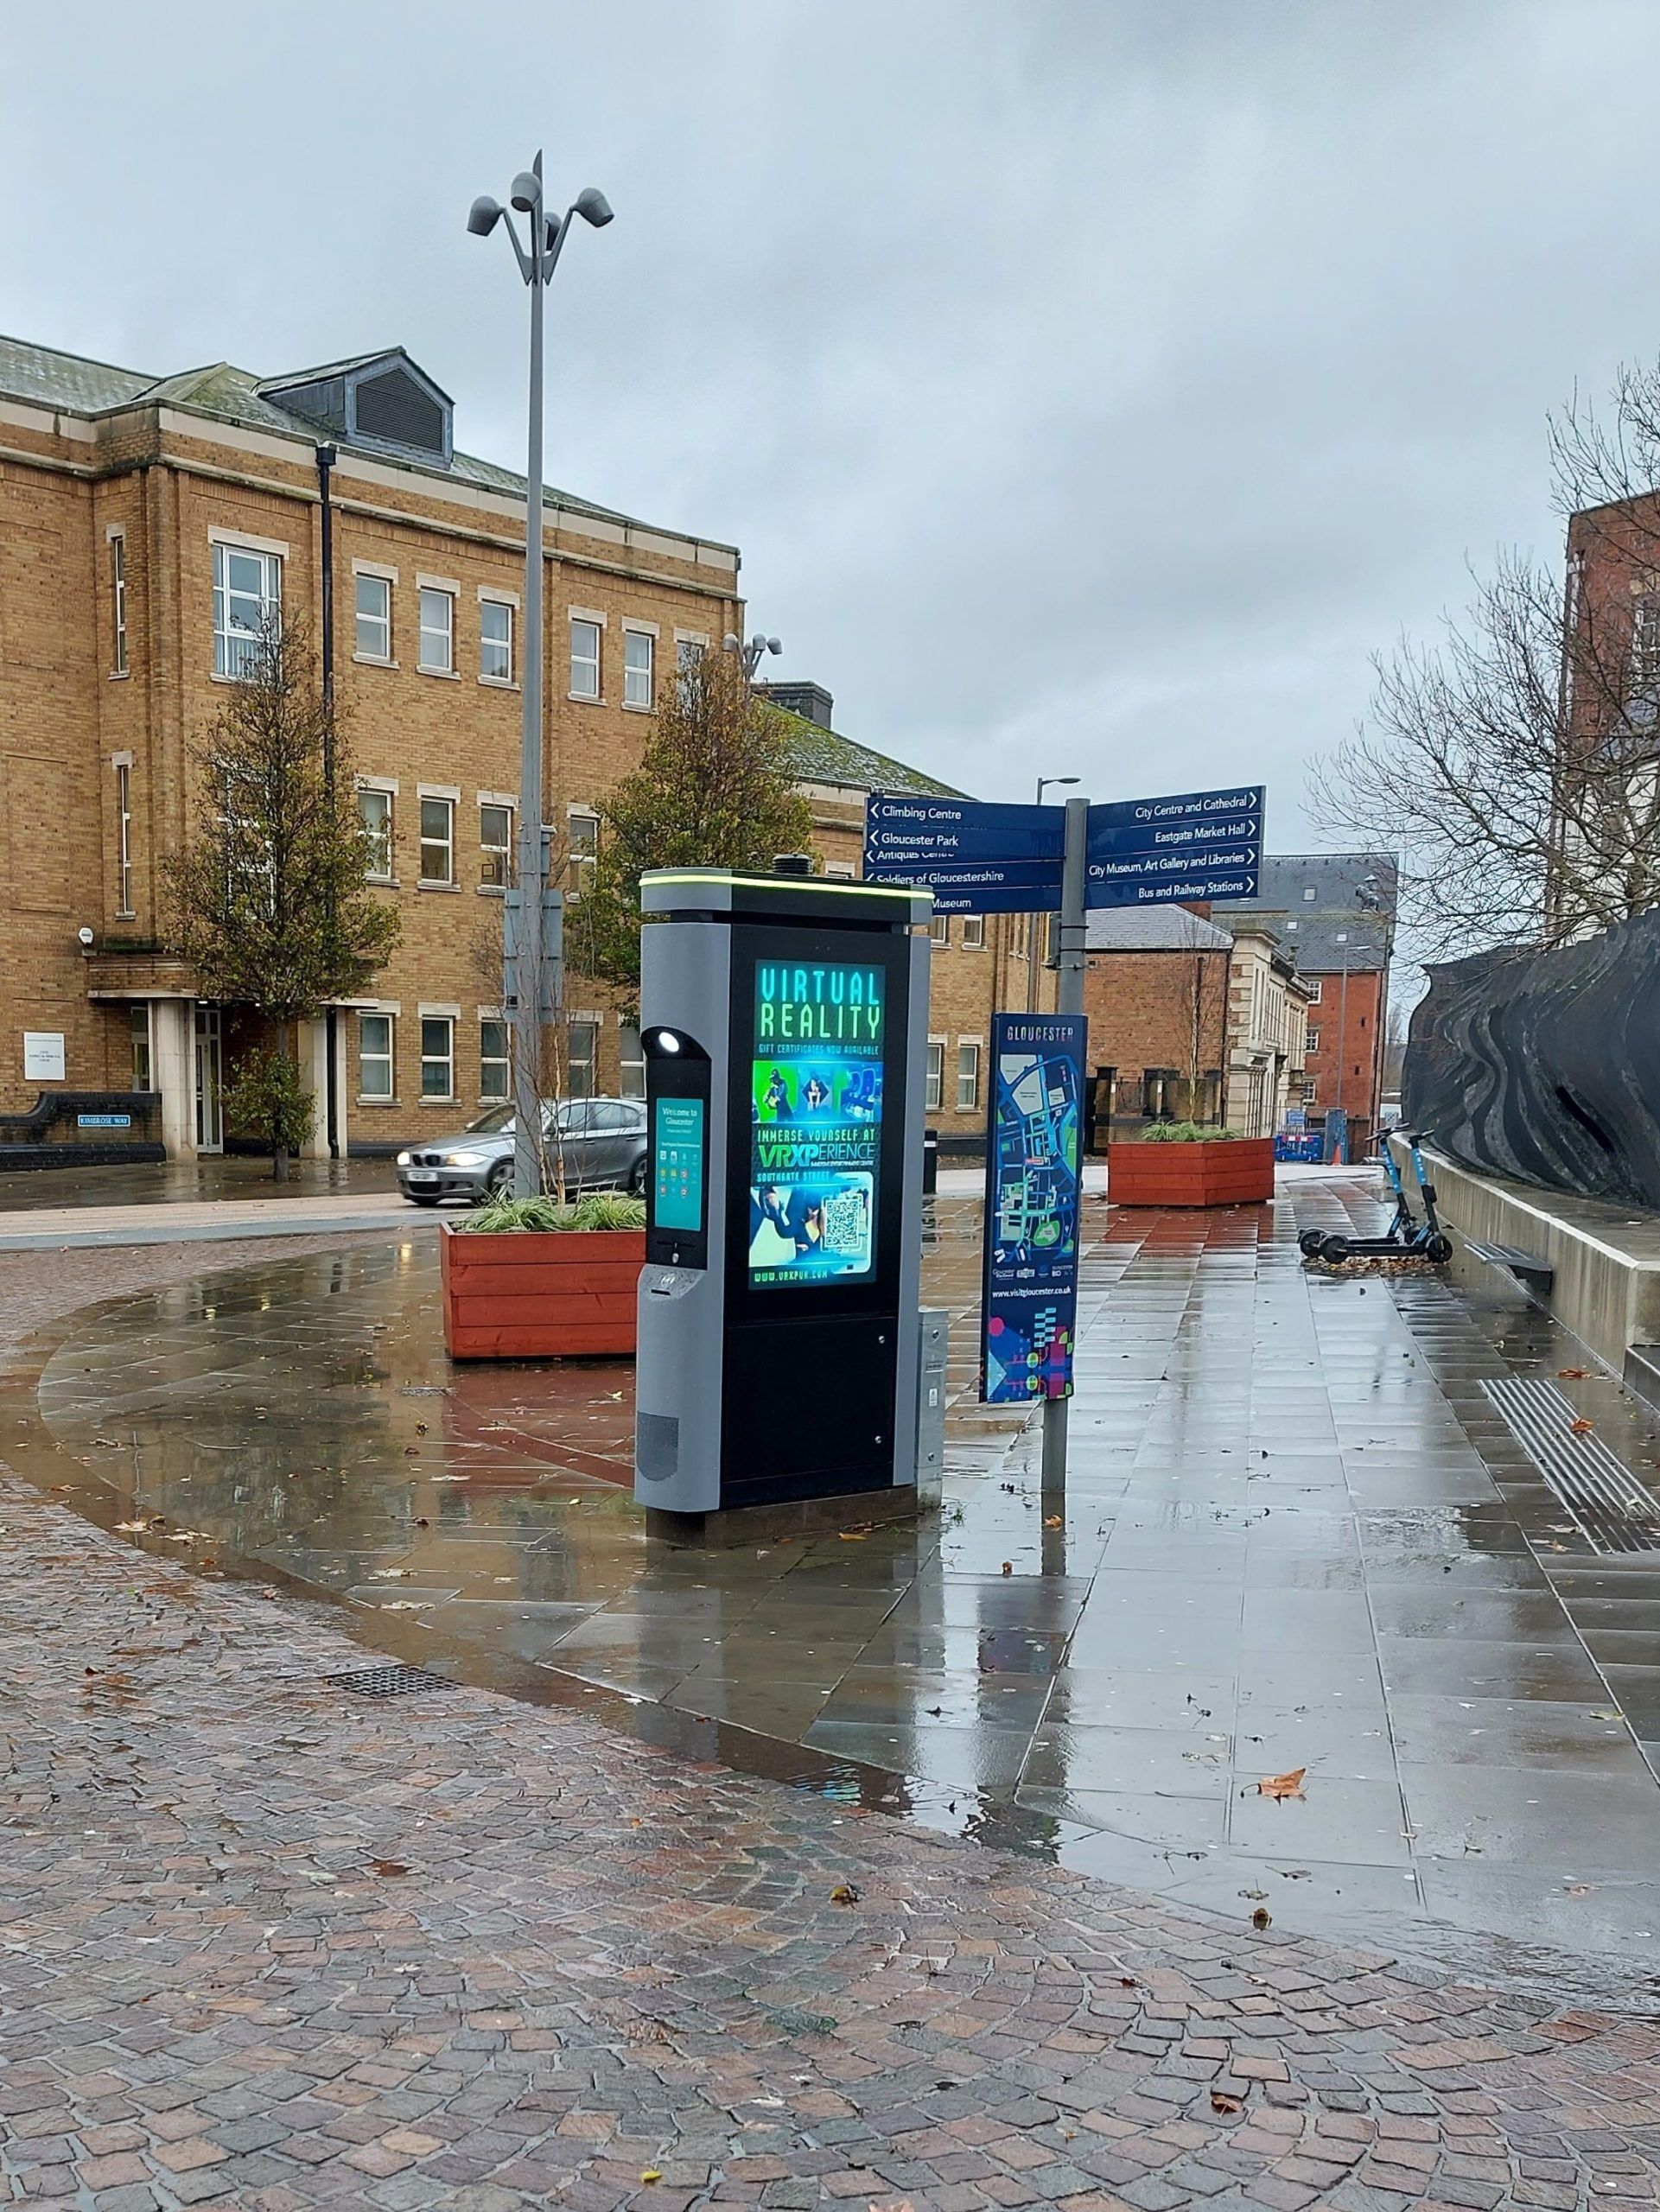 Tourism kiosk with digital advertising in a city in the West of England